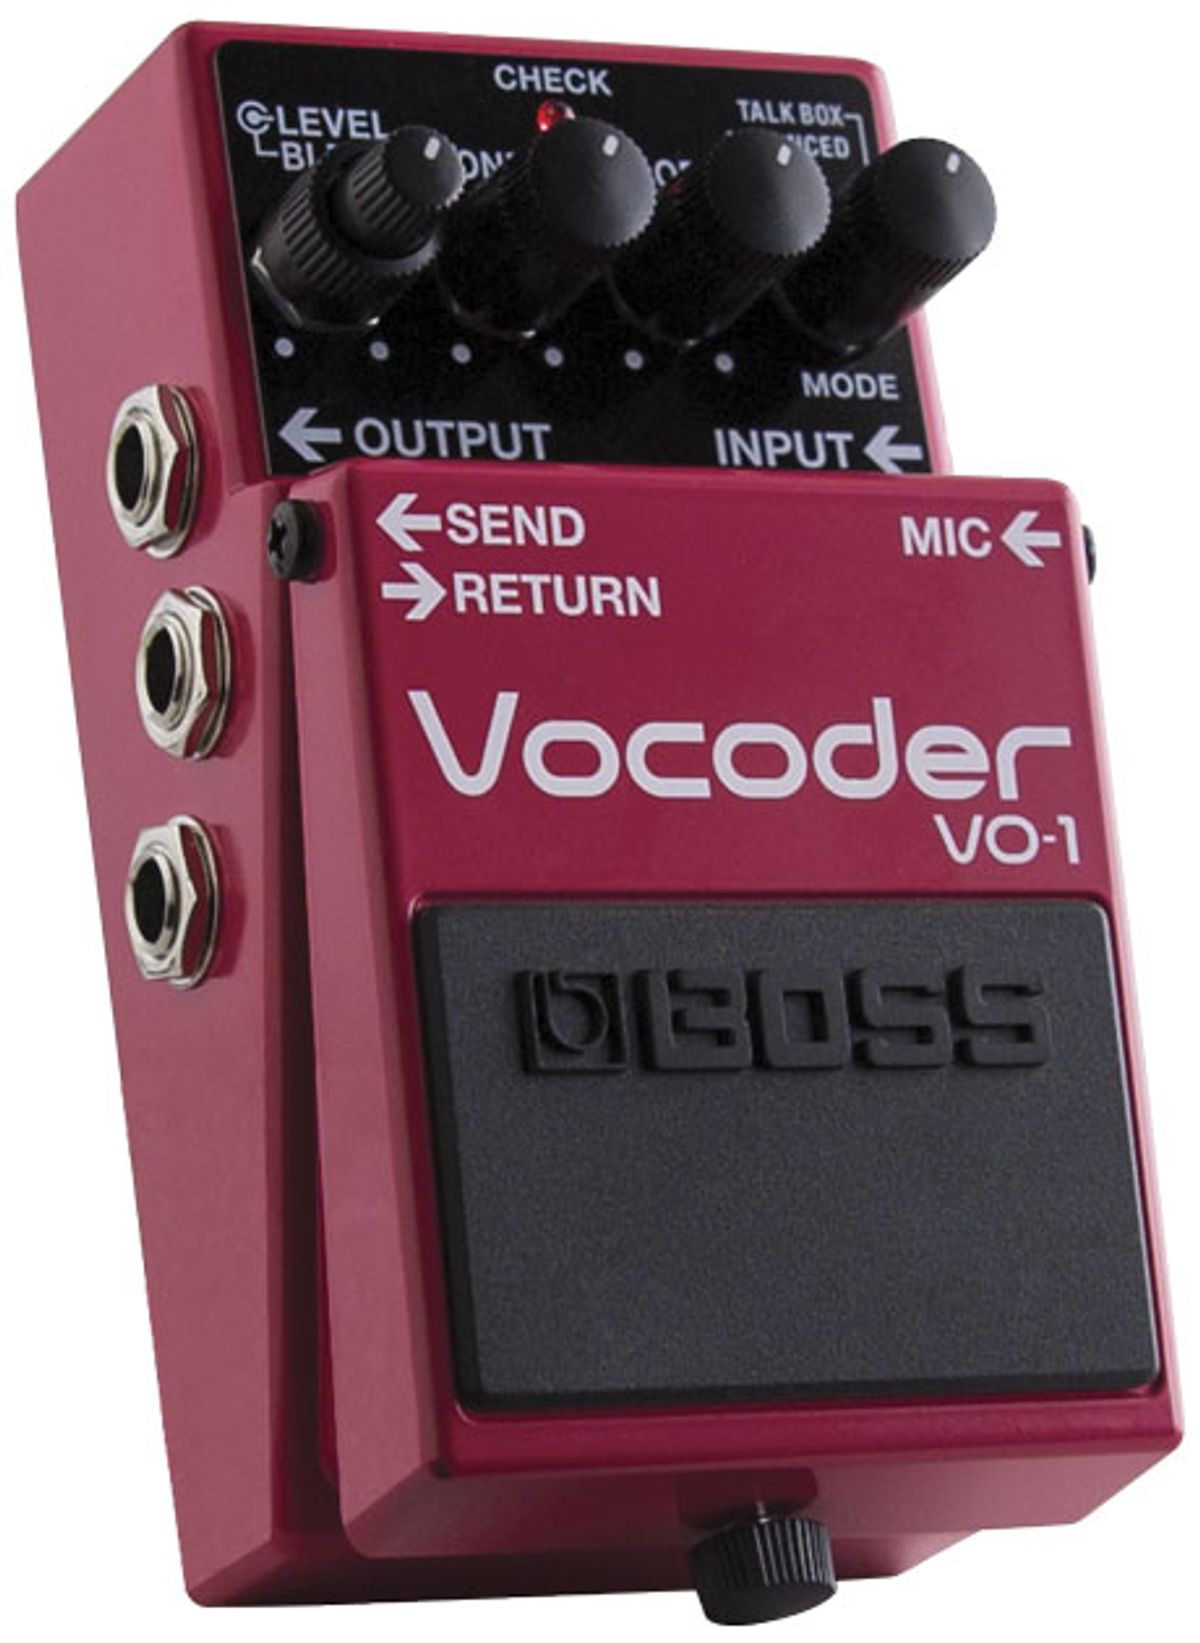 Boss Vo 1 Vocoder Review Premier Guitar The Best Guitar And Bass Reviews Videos And Interviews On The Web